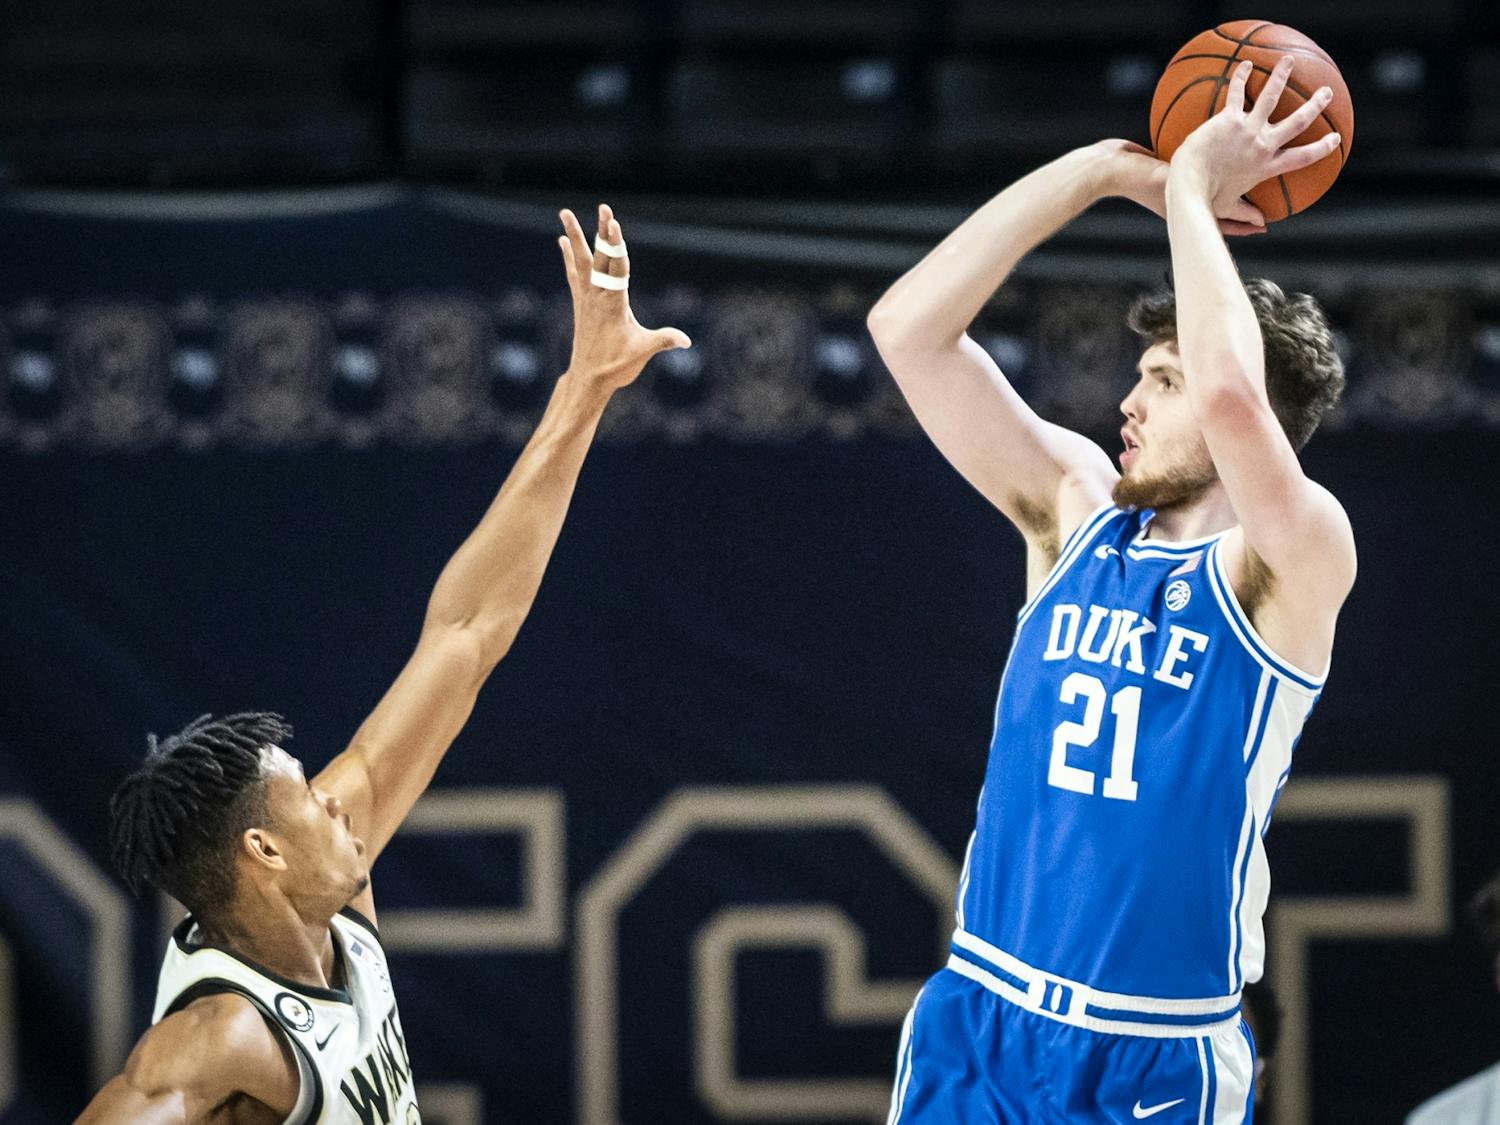 Matthew Hurt impressed yet again for the Blue Devils, finishing with 22 points on 8-of-9 shooting from the floor.